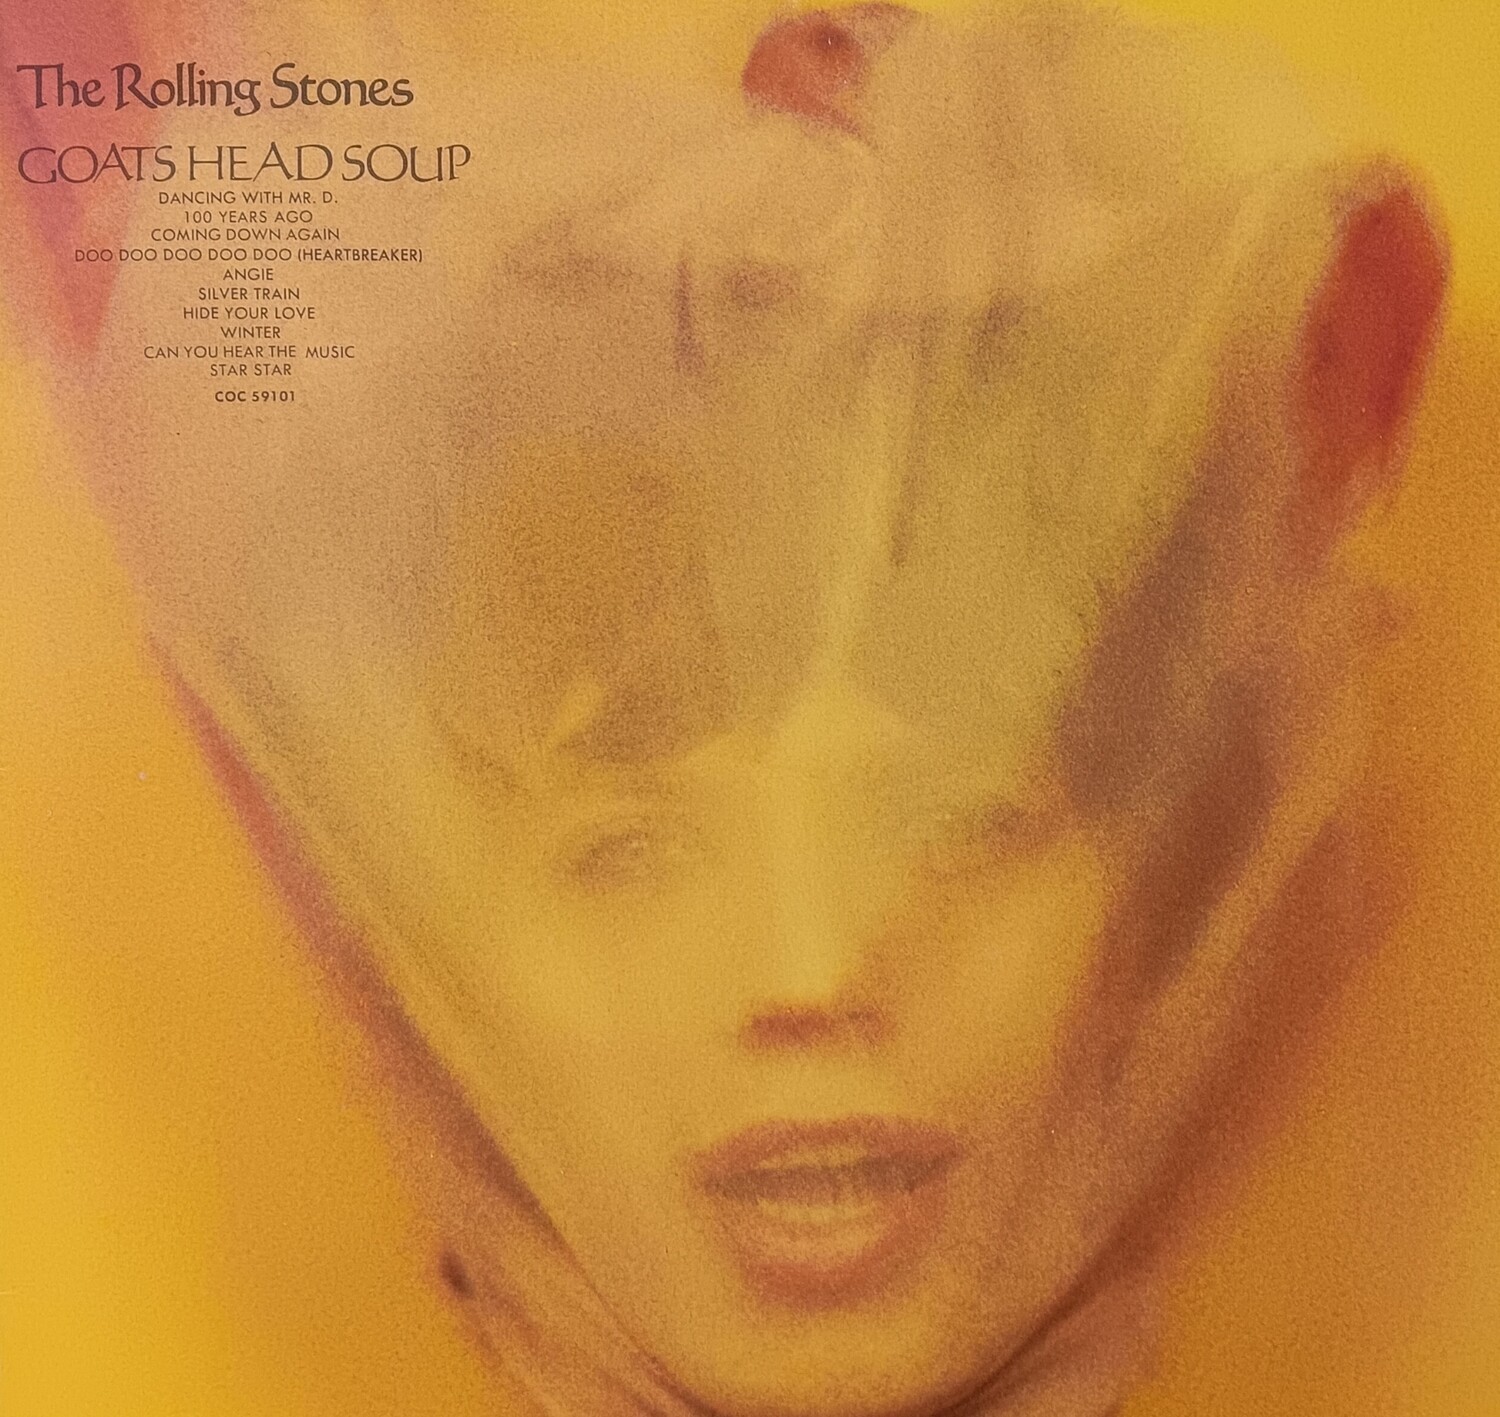 THE ROLLING STONES - Goats head soup